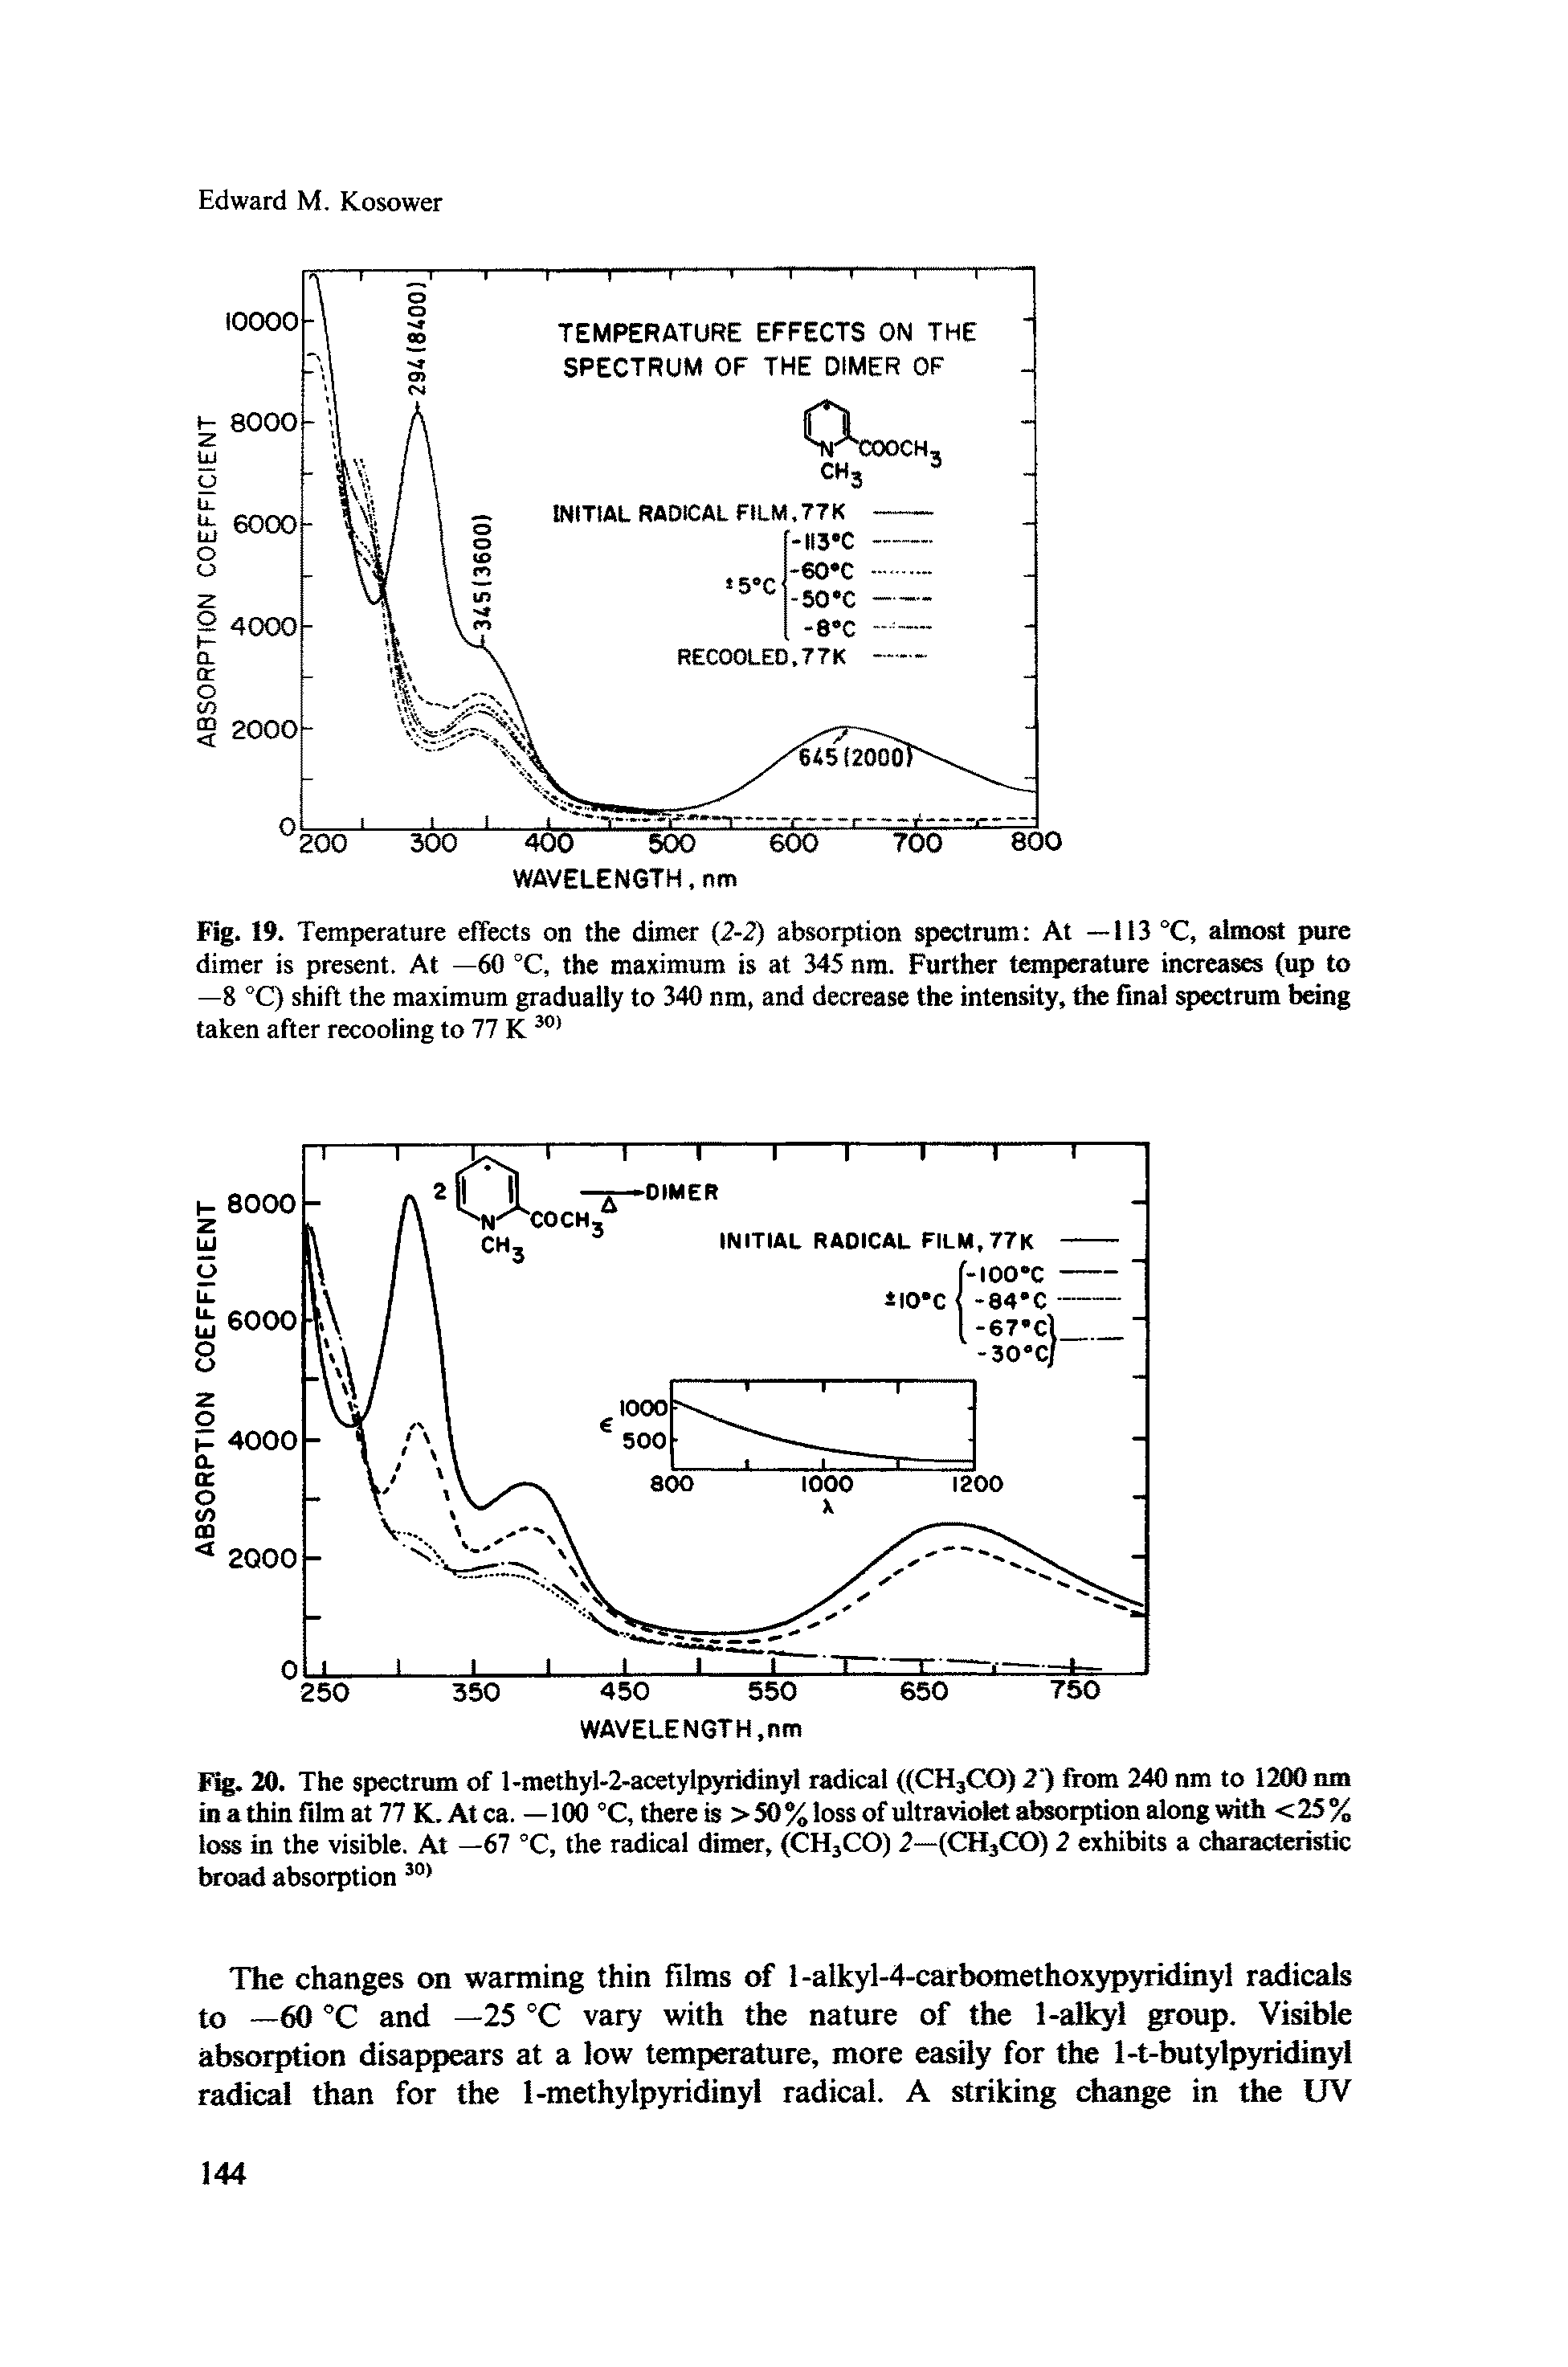 Fig. 19. Temperature effects on the dimer (2-2) absorption spectrum At —113 °C, almost pure dimer is present. At —60 °C, the maximum is at 345 nm. Further temperature increases (up to —8 °C) shift the maximum gradually to 340 nm, and decrease the intensity, the final spectrum being taken after recooling to 77 K...